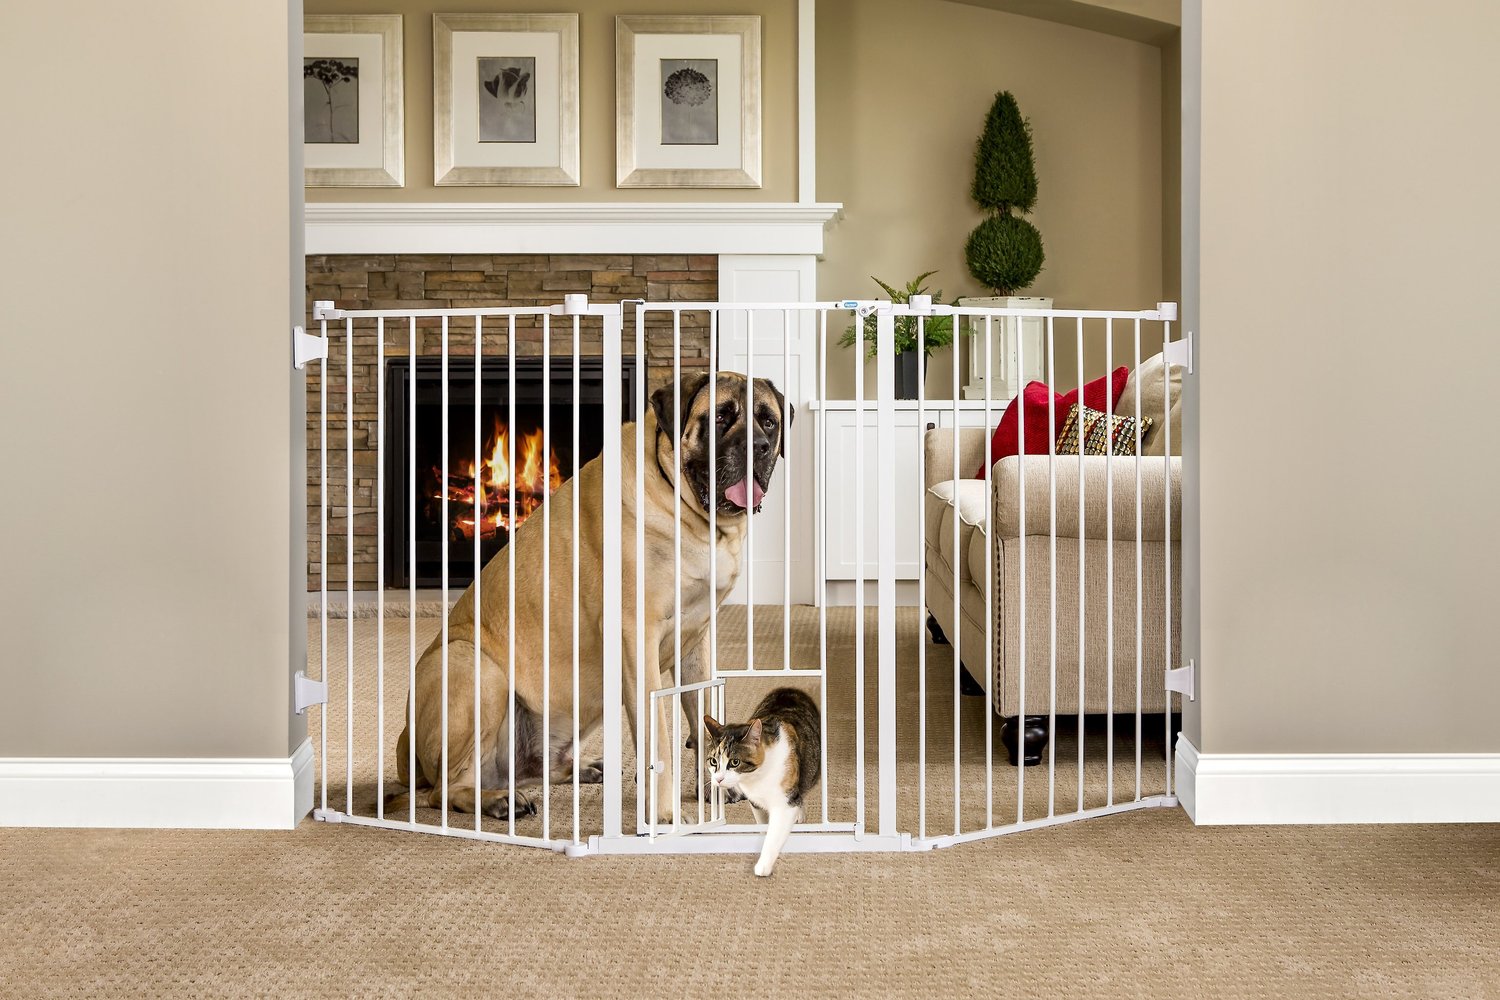 Carlson Extra Wide Walk Through Gate with Pet Door